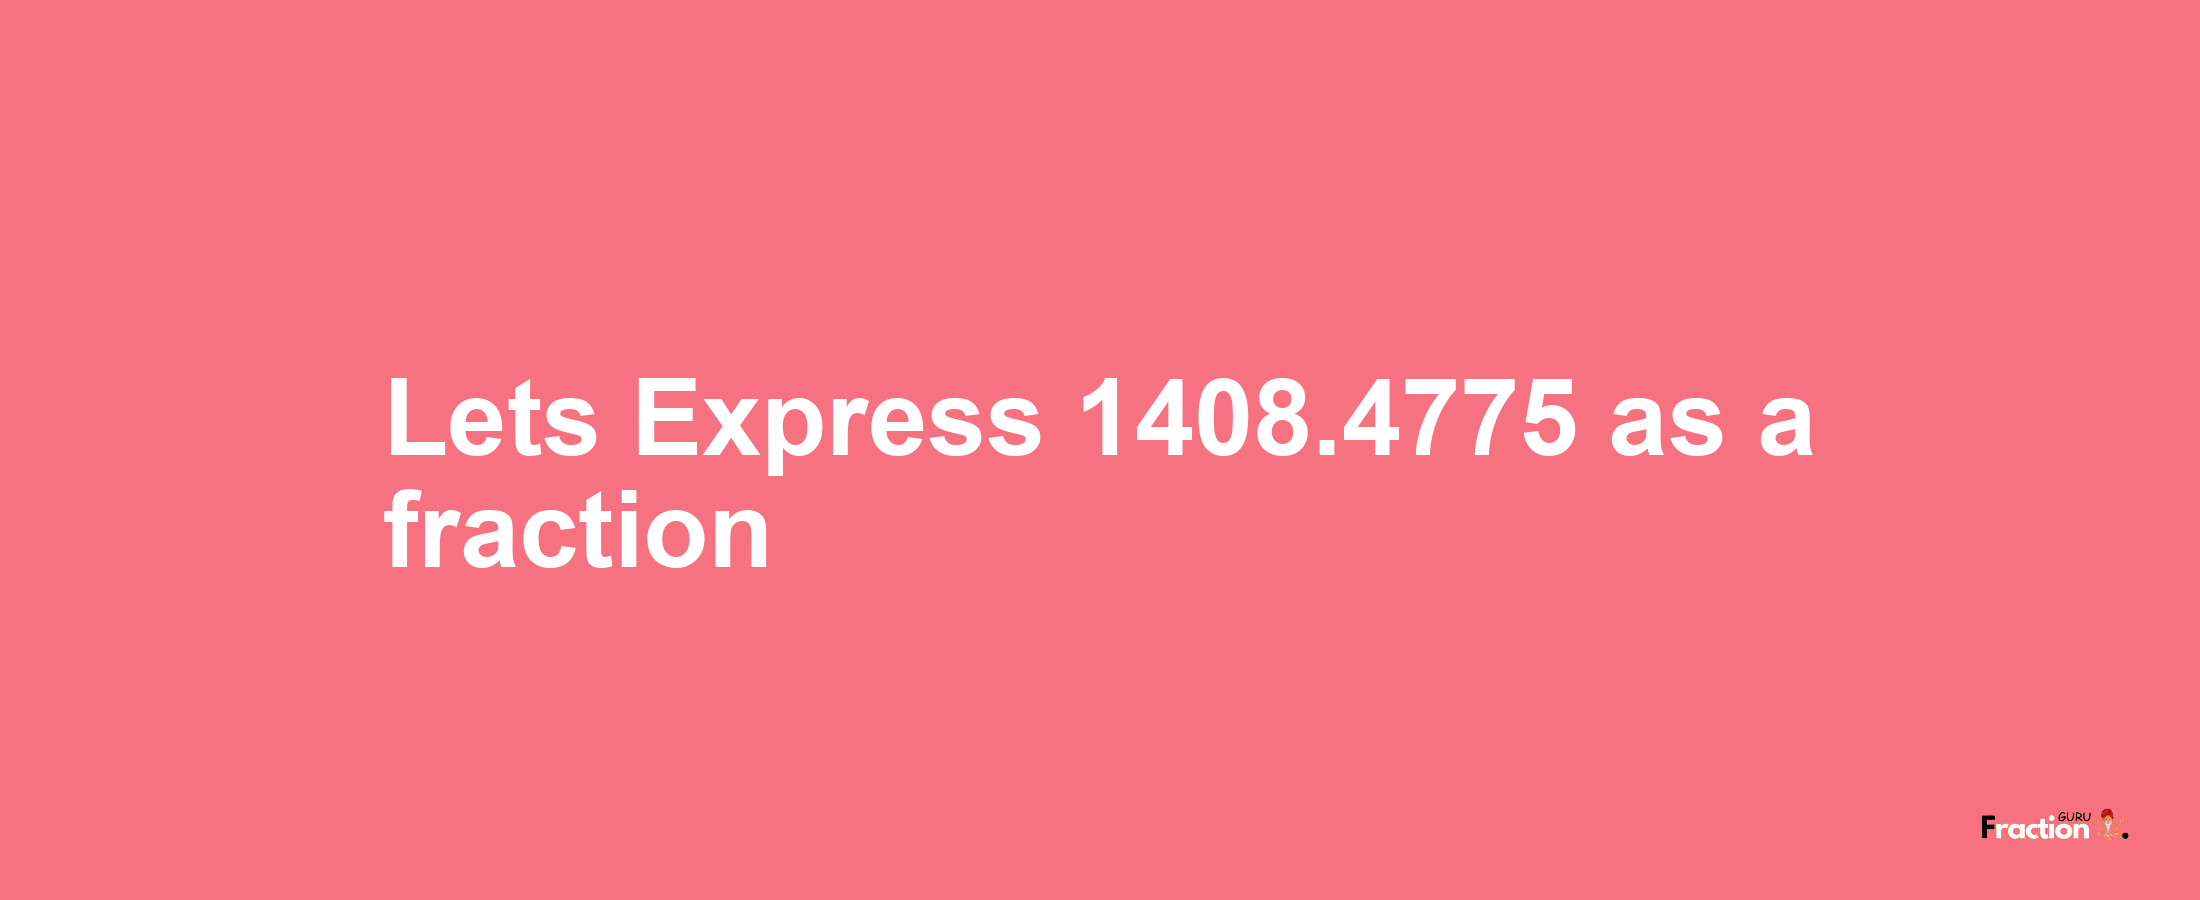 Lets Express 1408.4775 as afraction